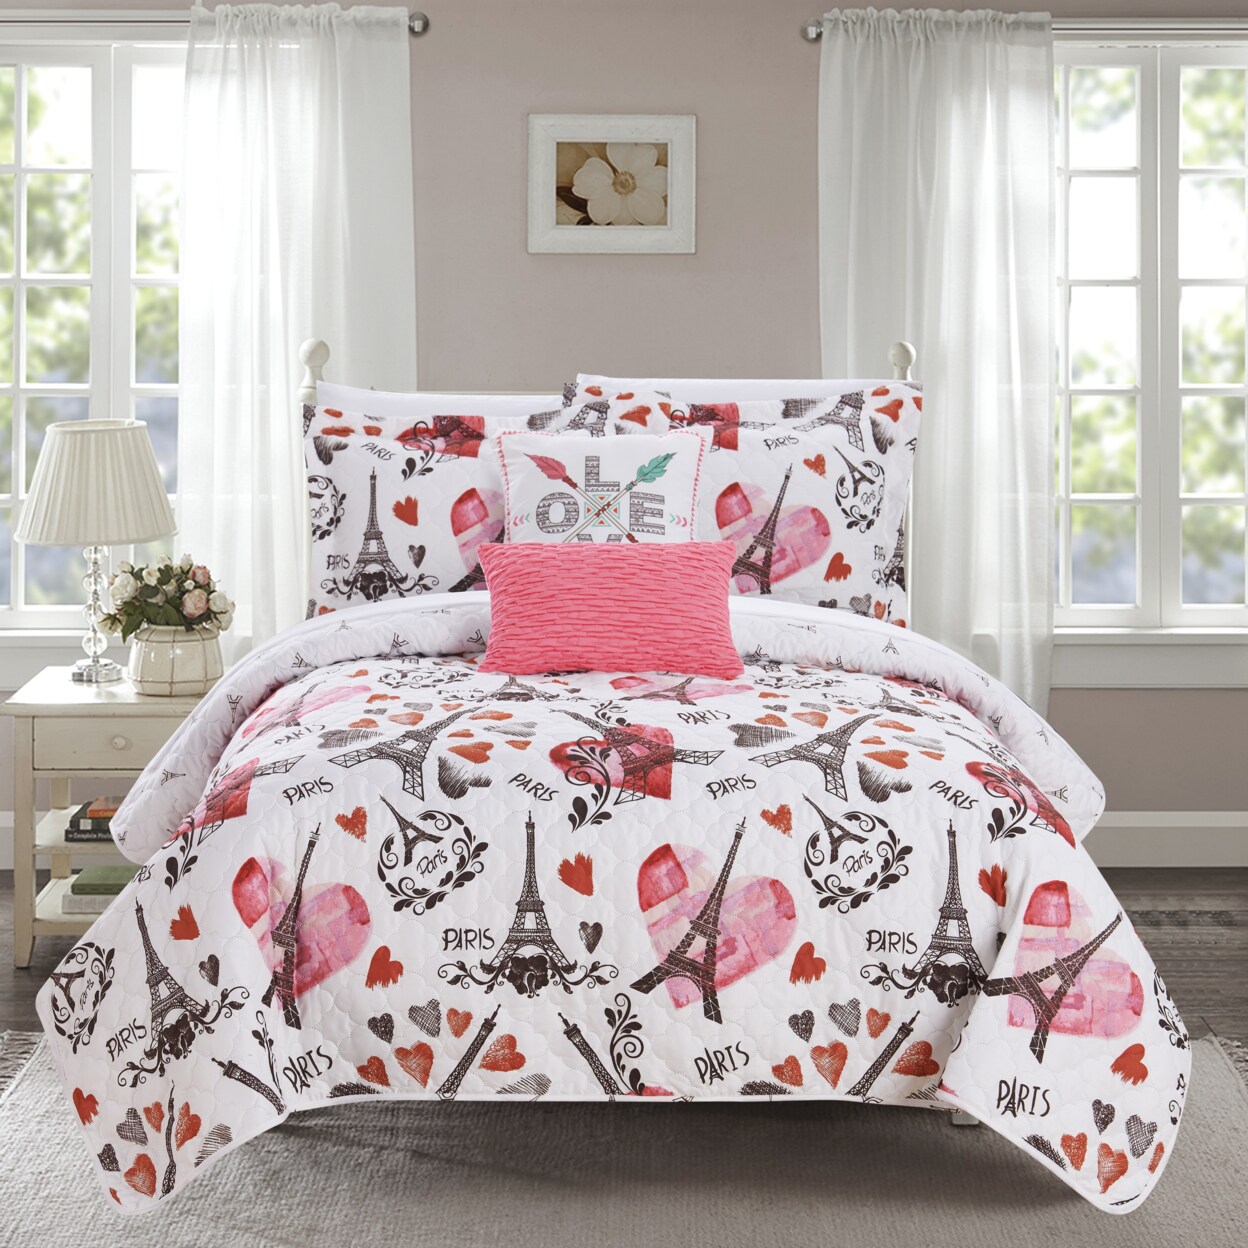 Chic Home Alphonse 5 or 4 Piece Reversible Quilt Set &#x22;Paris Is Love&#x22; Inspired Printed Design Coverlet Bedding